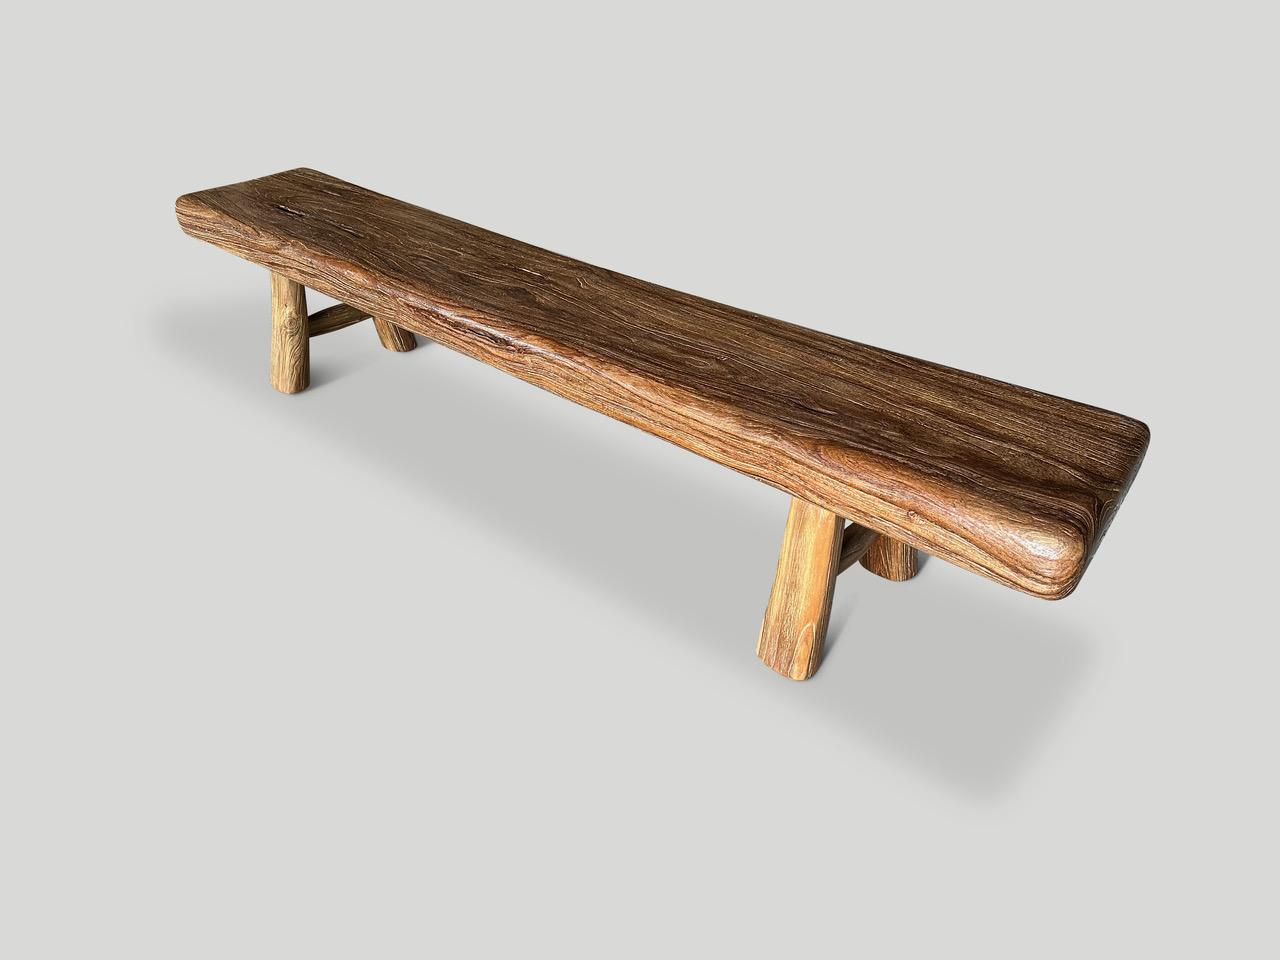 Introducing the Mid Century Couture Collection. Furniture constructed by hand from start to finish. A beautiful single three and a half thick slab of teak wood taken from my finest collection is hand carved to produce this impressive bench. We added